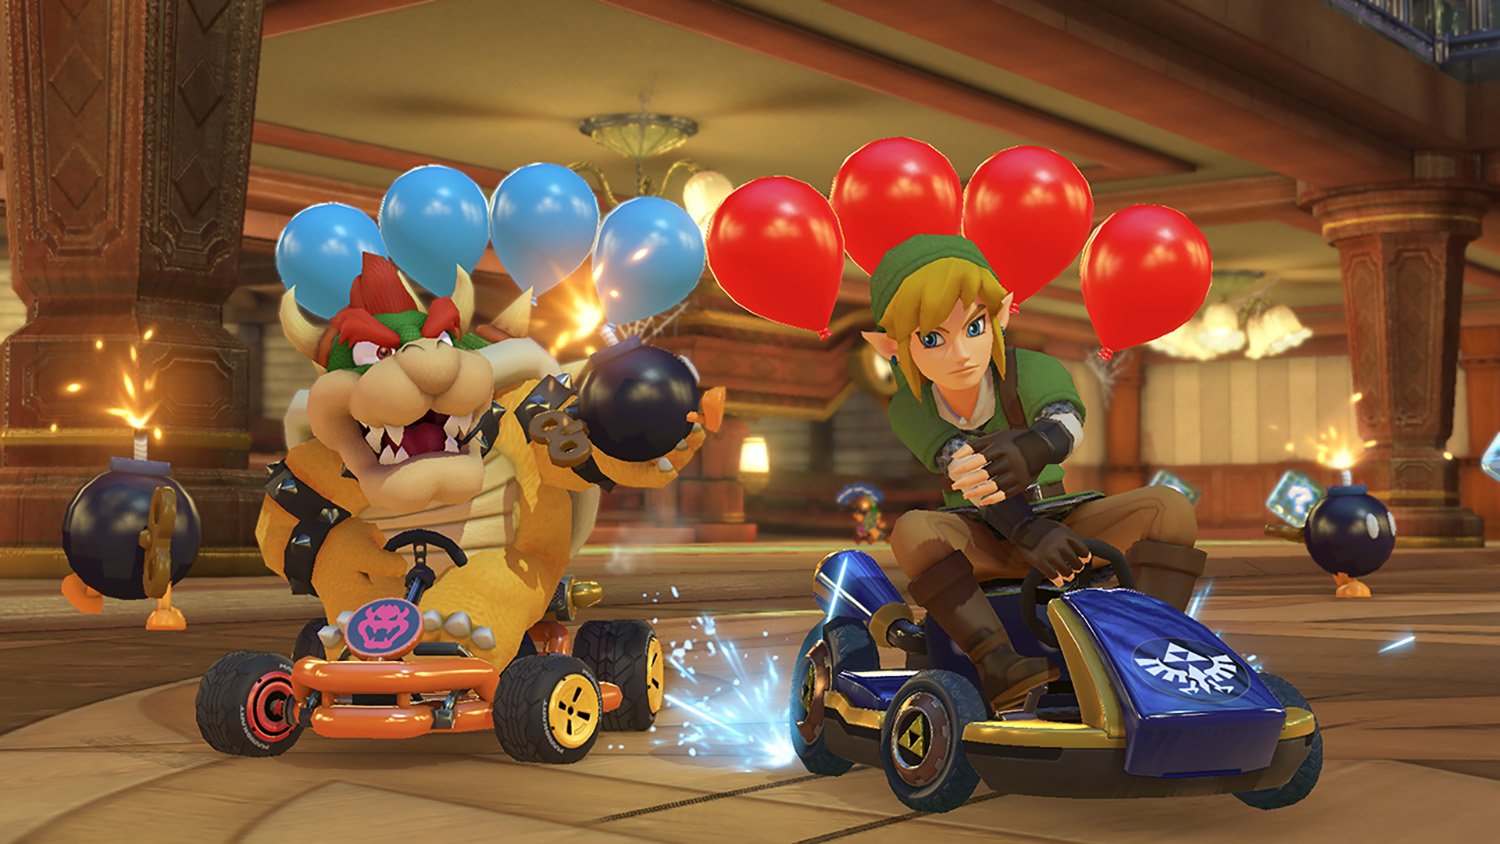 Bowser and Link drive balloon karts in Mario Kart 8 Deluxe